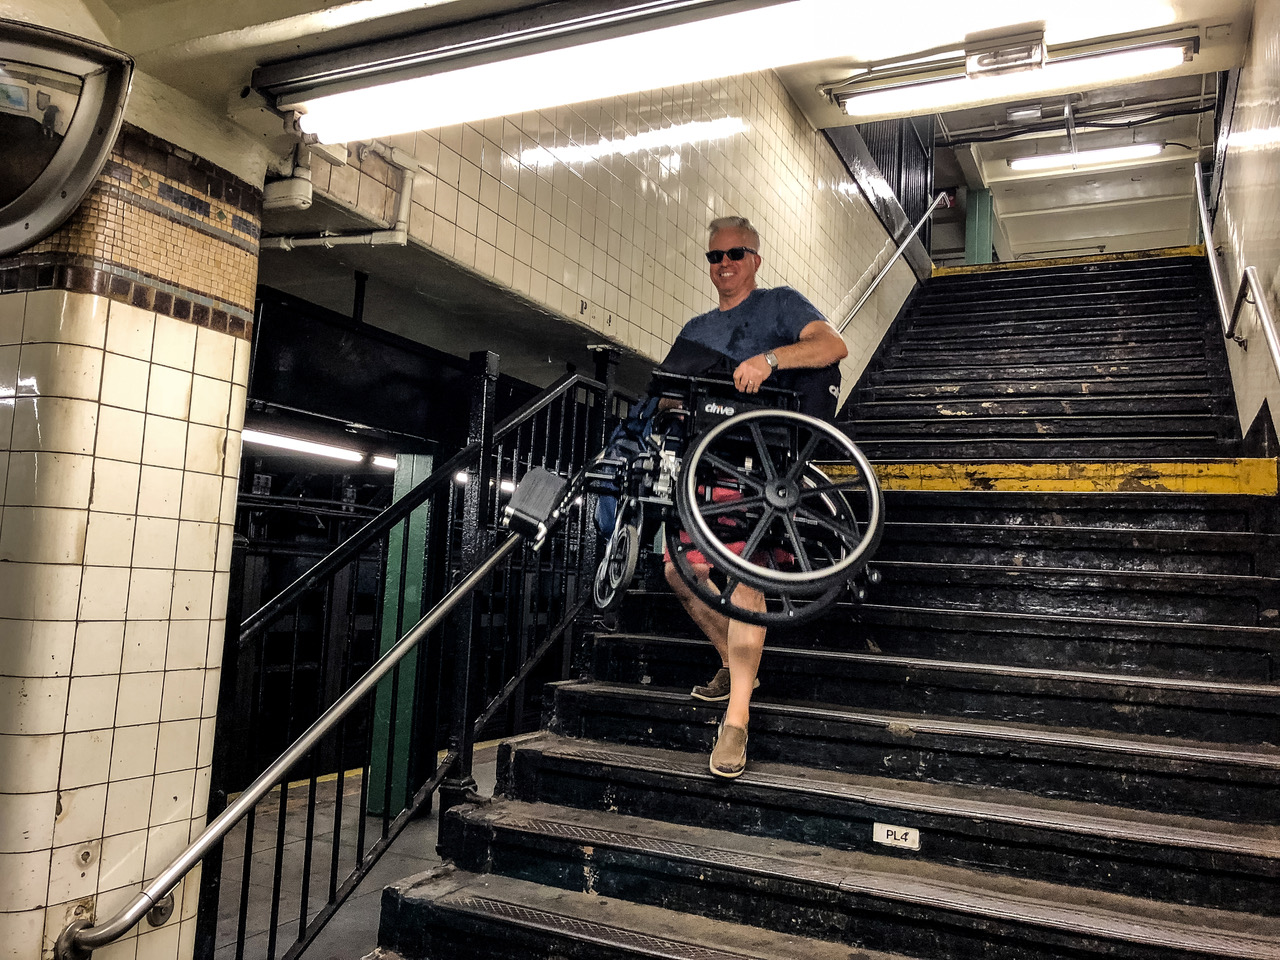 Now I can carry Michael's wheelchair down the subway stairs no sweat!